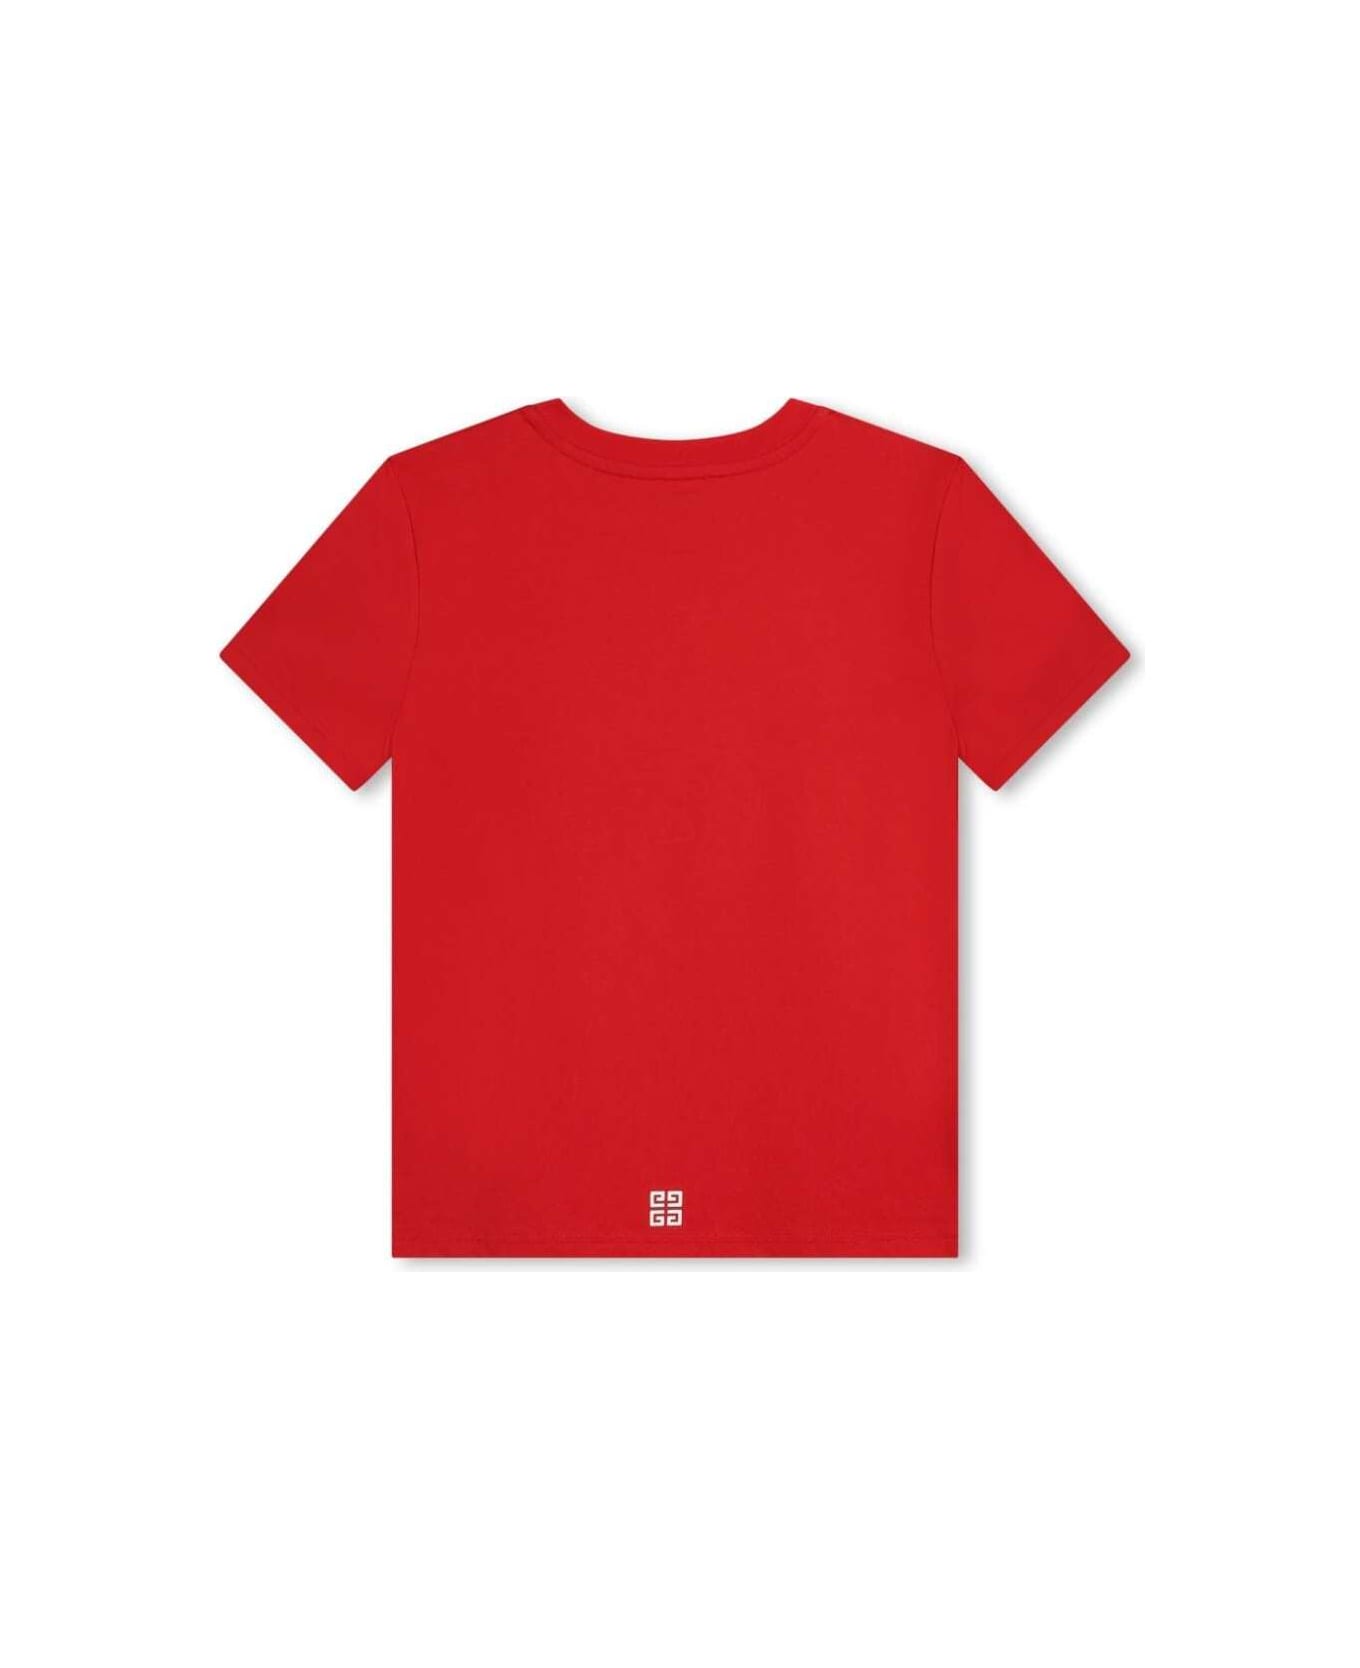 Givenchy Red Crewneck T-shirt With Contrasting Logo Lettering Print In Cotton Boy - Red